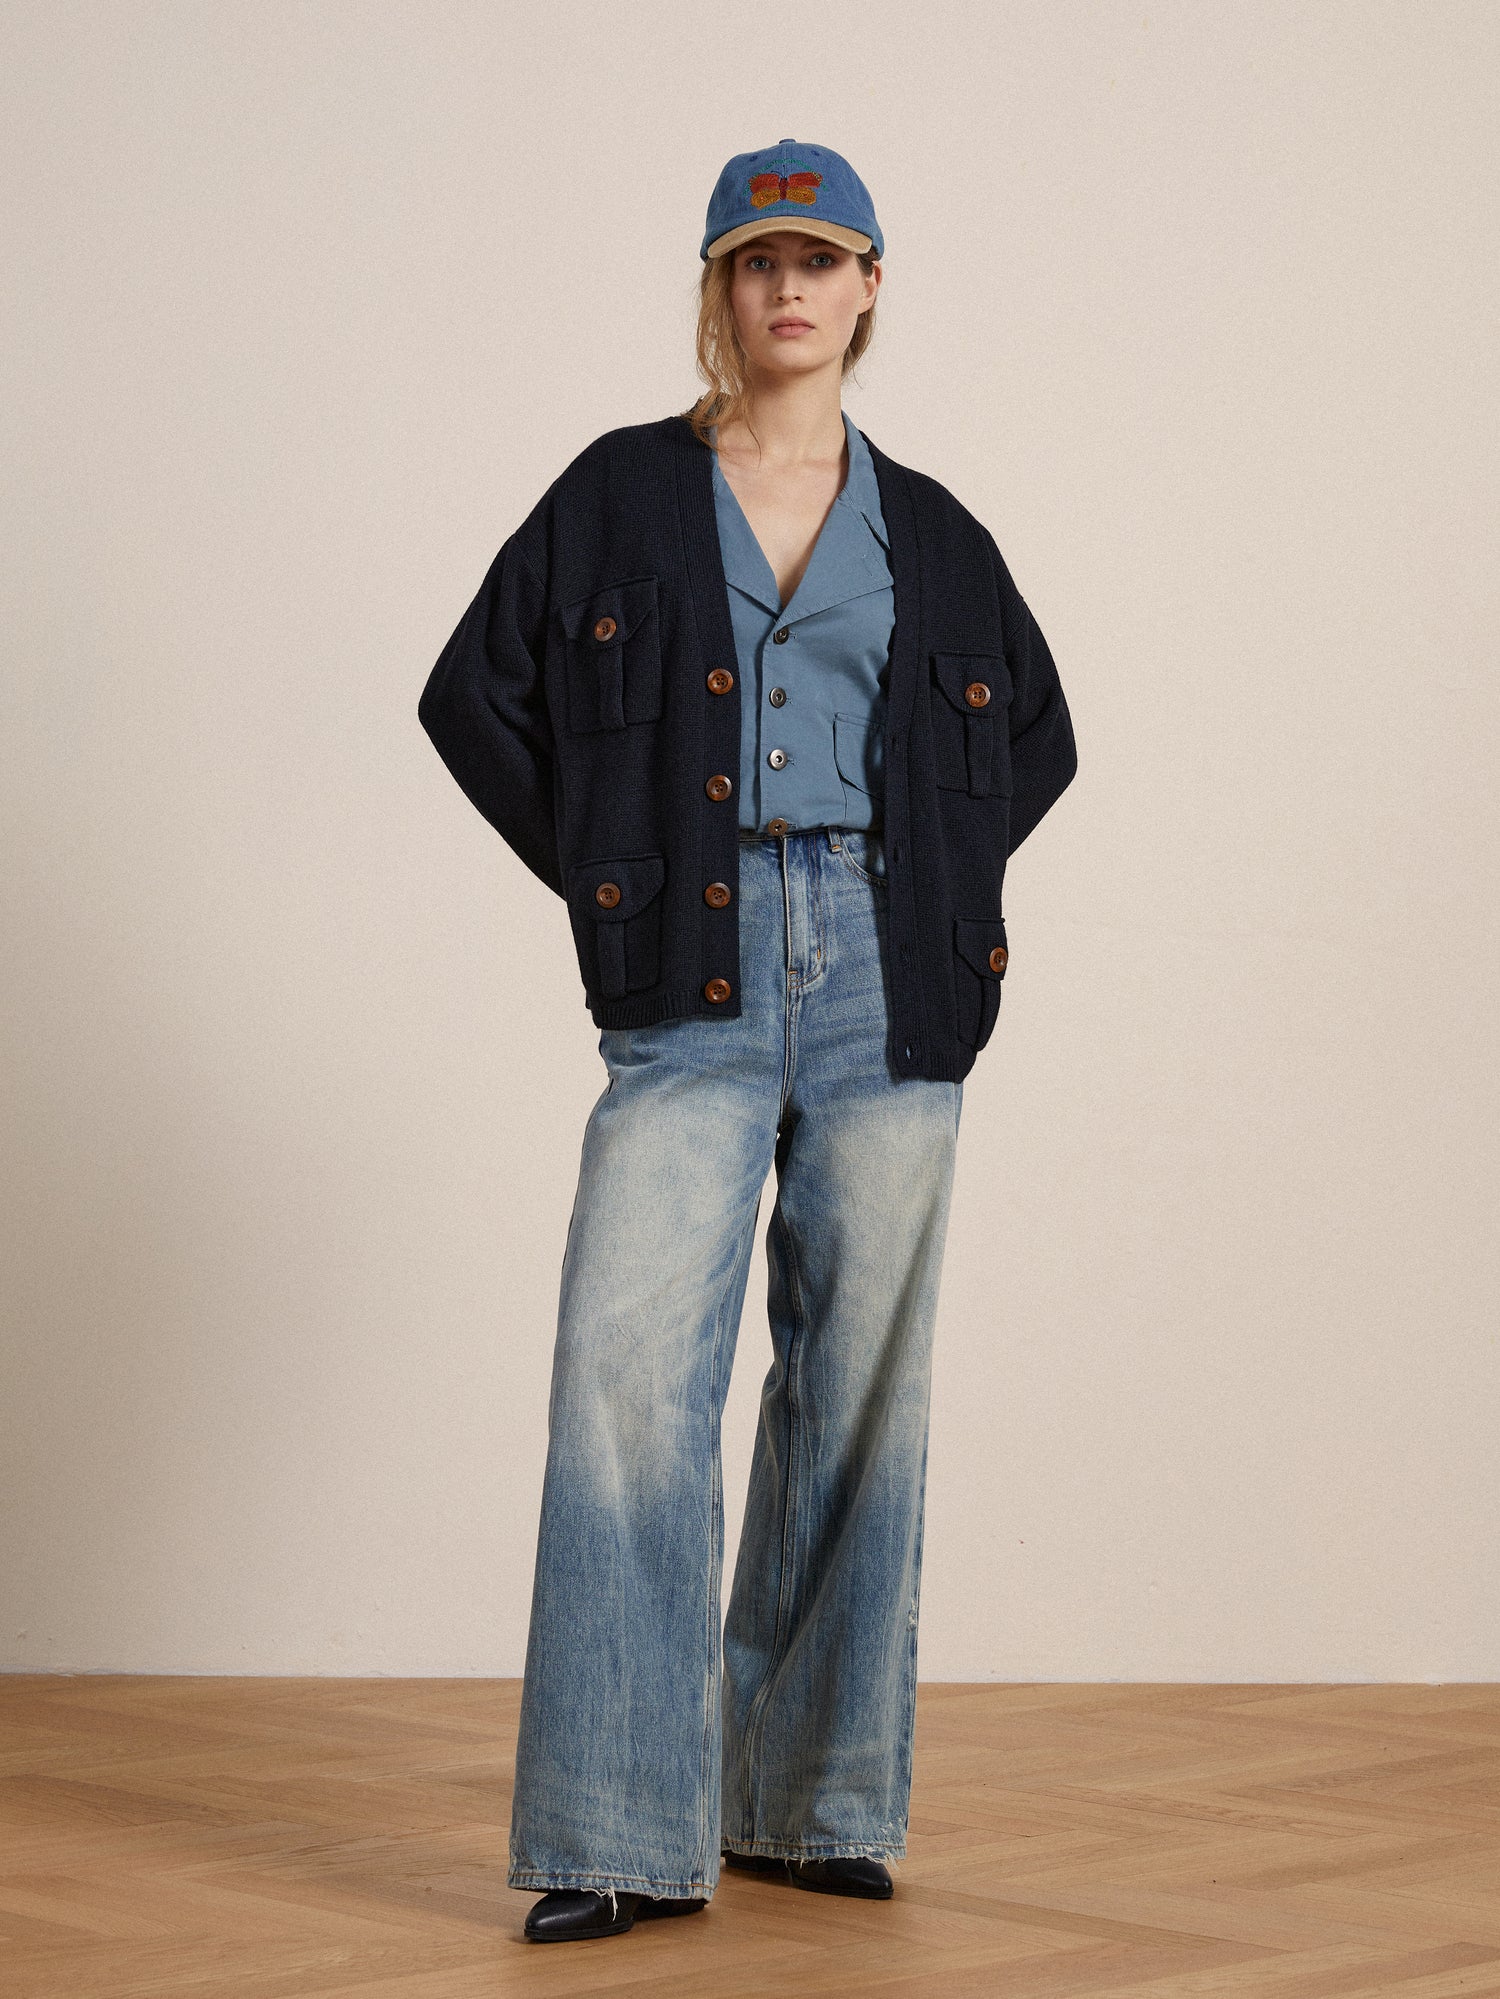 A woman in blue jeans and a Found Patina Work Jacket, with a vintage workwear aesthetic, is standing on a wooden floor.